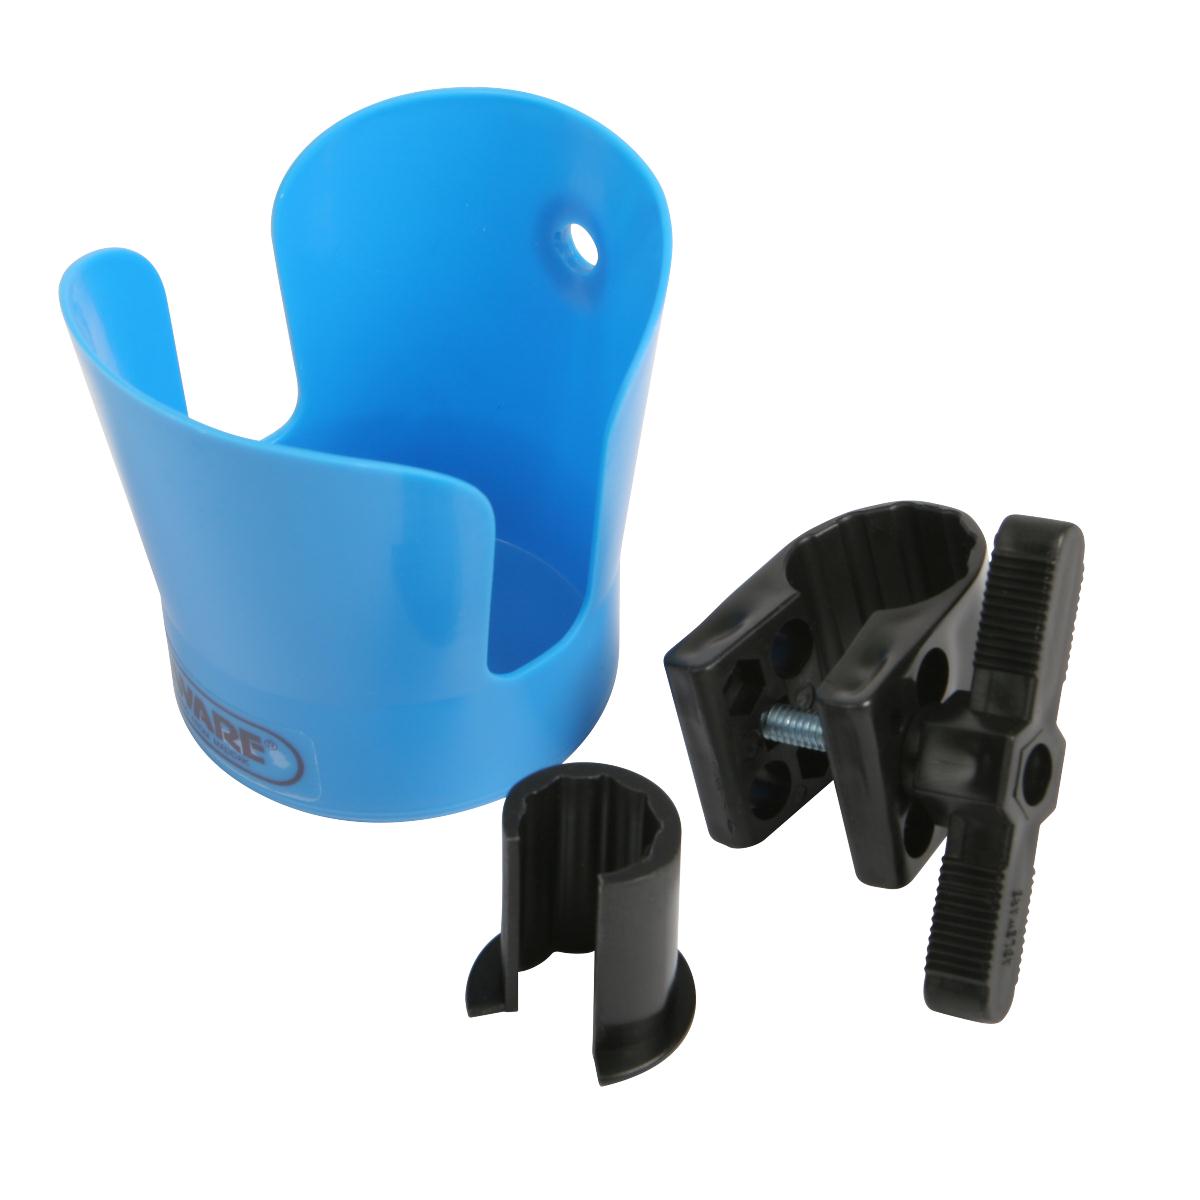 Cup Holder for Wheelchairs